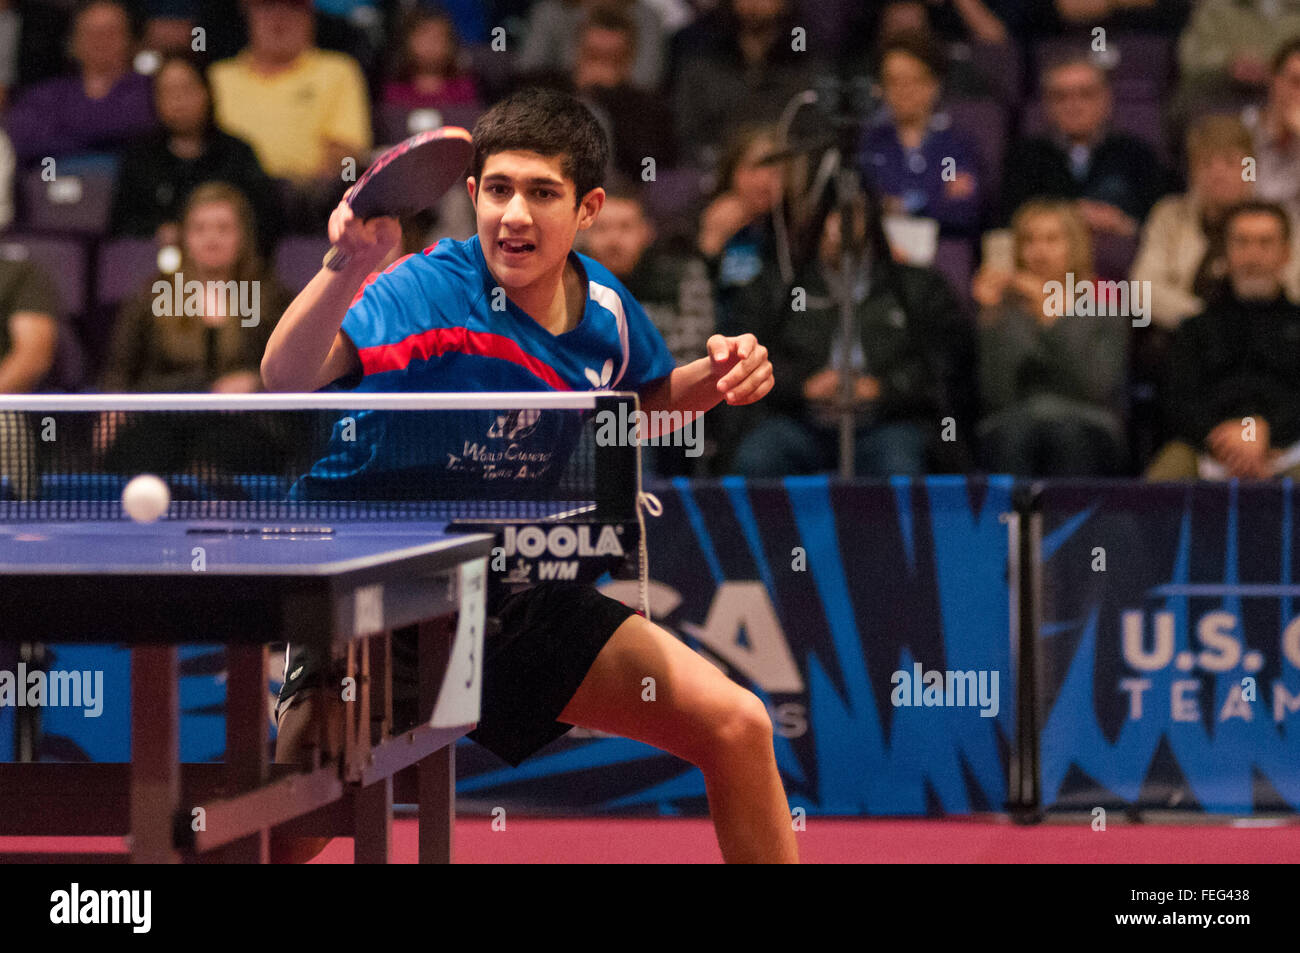 Greensboro, North Carolina, US. 6th Feb, 2016. Feb. 6, 2016 - Greensboro, N.C., USA - KANAK JHA works the corner of the table against Kunal Chodri during the men's semi-finals on day three of the 2016 U.S. Olympic Table Tennis Trials. Jha defeated Chodri to advance to the men's final. The top three men and women from the trials move on to compete in April at the 2016 North America Olympic Qualification tournament in Ontario, Canada. The 2016 Summer Olympics will be held in Rio De Janeiro, Brazil, Aug. 5-21. © Timothy L. Hale/ZUMA Wire/Alamy Live News Stock Photo